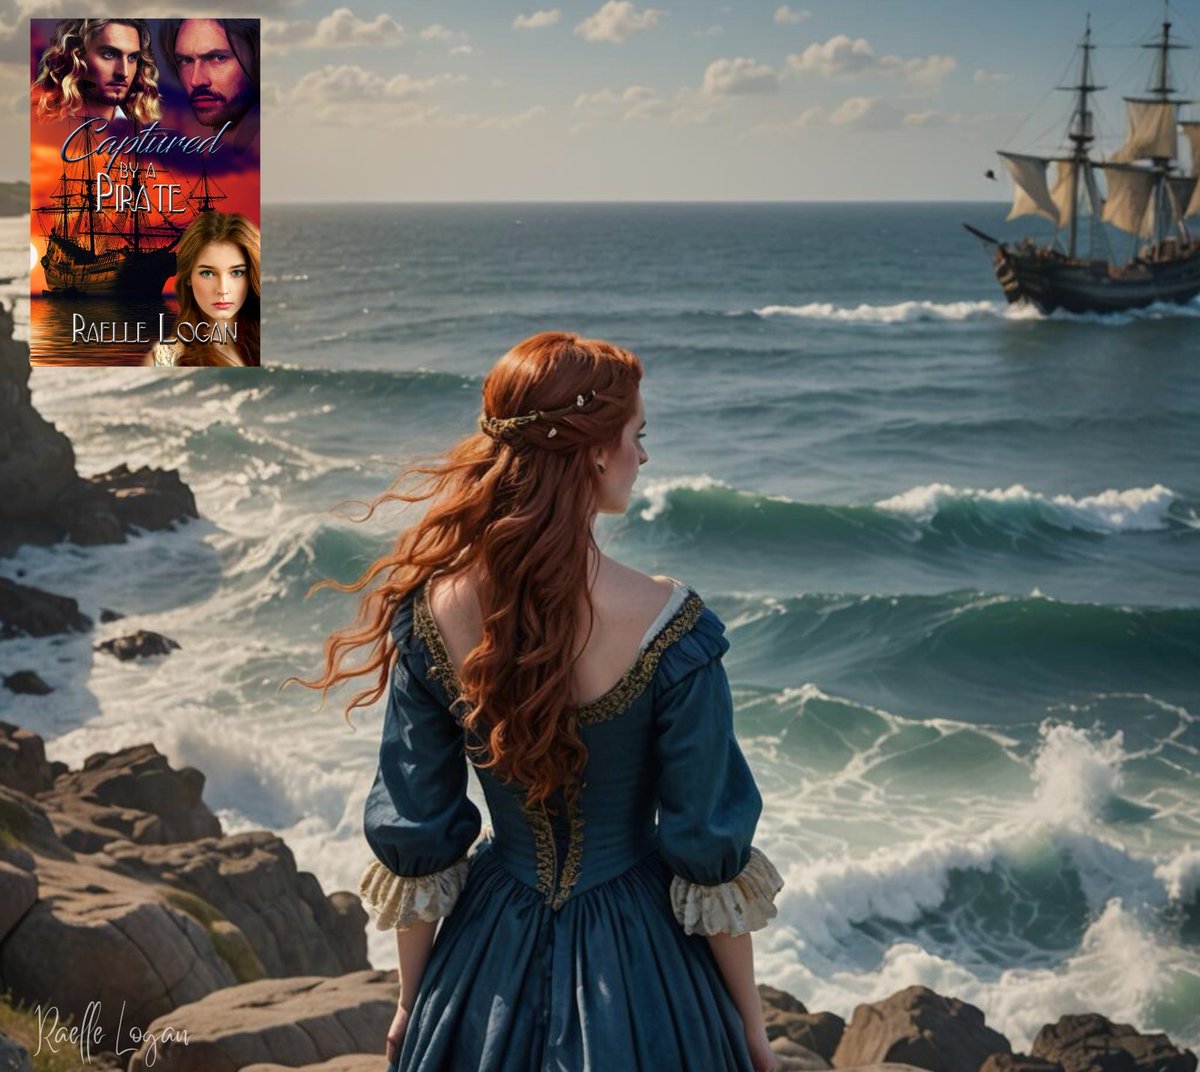 Selrick Calidore and Blake Morvane are two pirates who are on a quest to destroy each other and anyone who dares to stand in their way. Can Gillian Lancaster alter everyone's destiny & heal the wounds bleeding in the past, or will she be slain in the feud? #books #booklovers